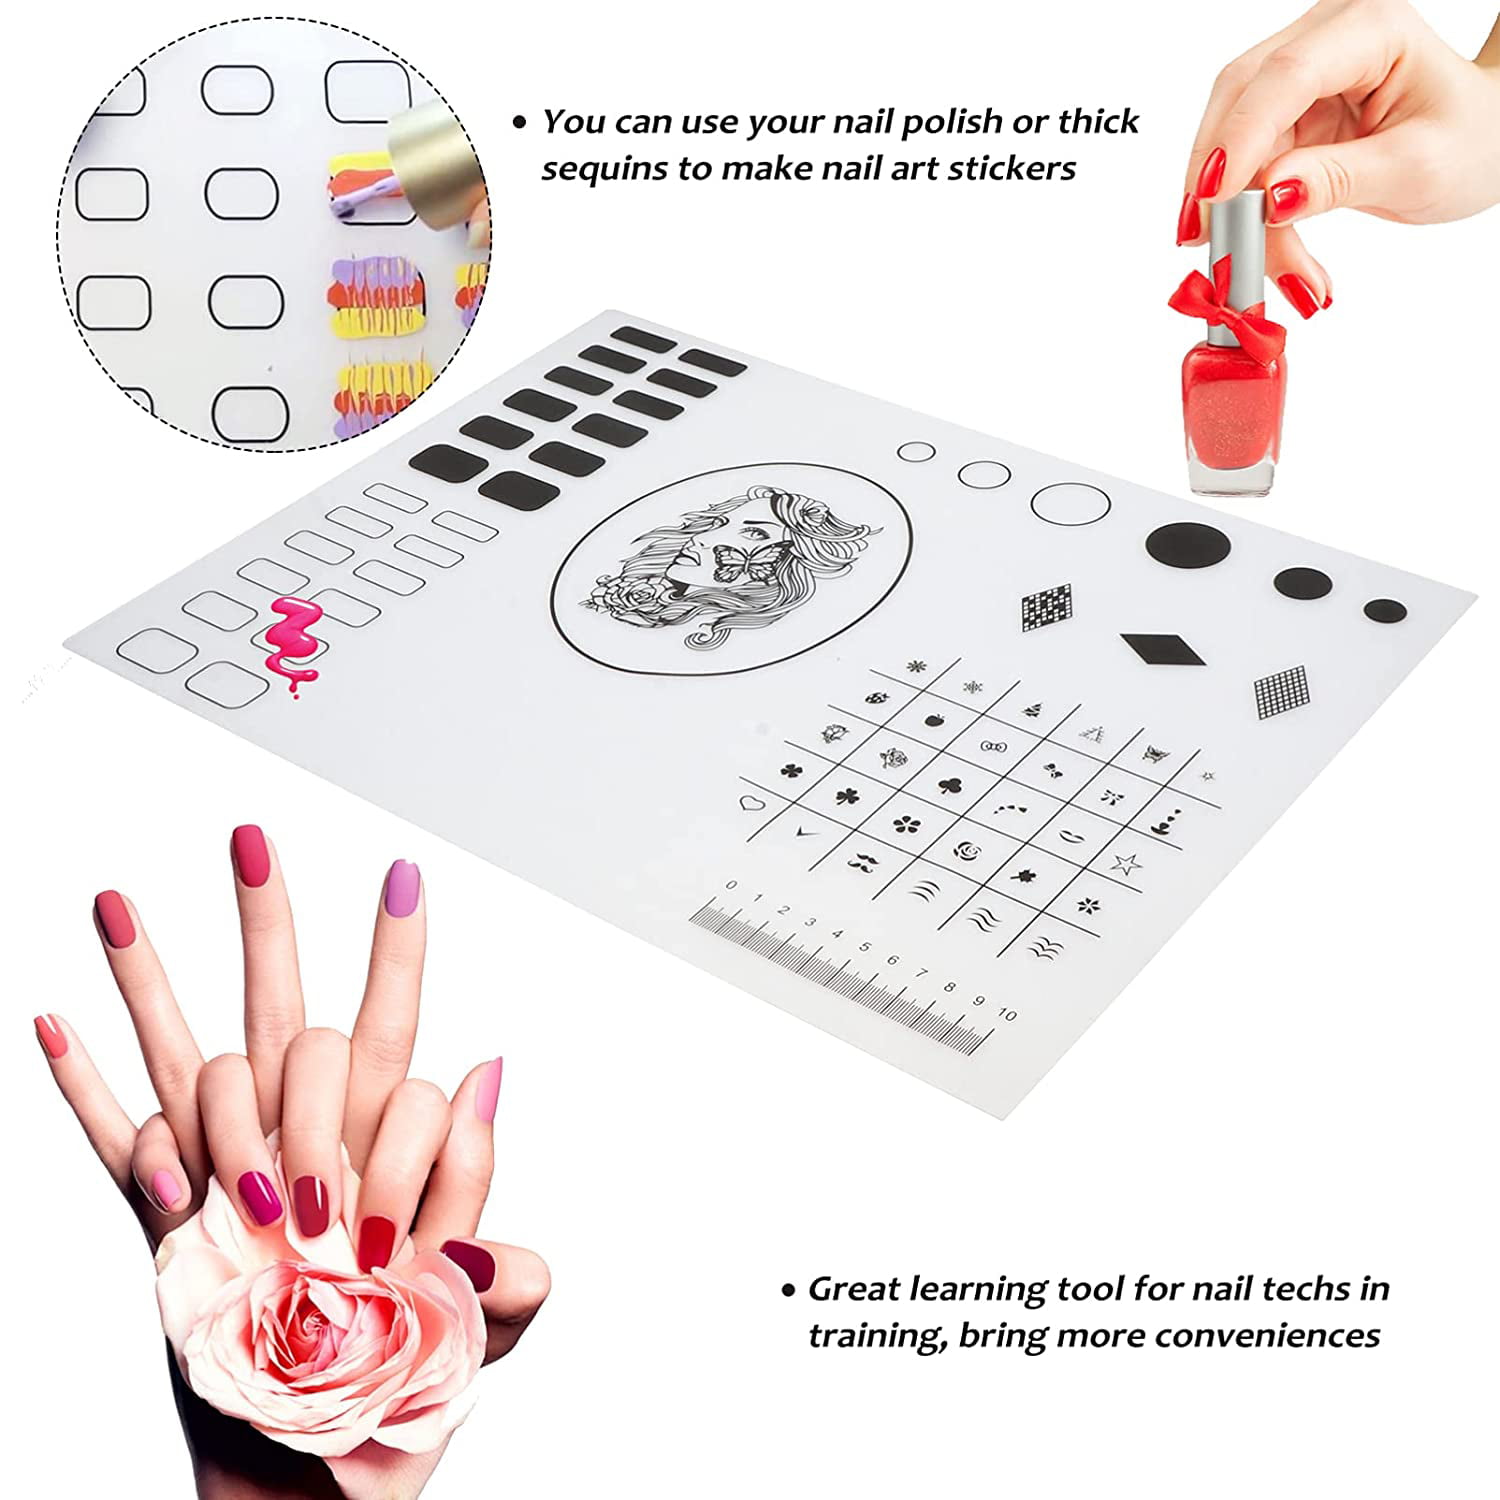 Foldable Silicone Nail Mat For Salon Manicure Practice Washable